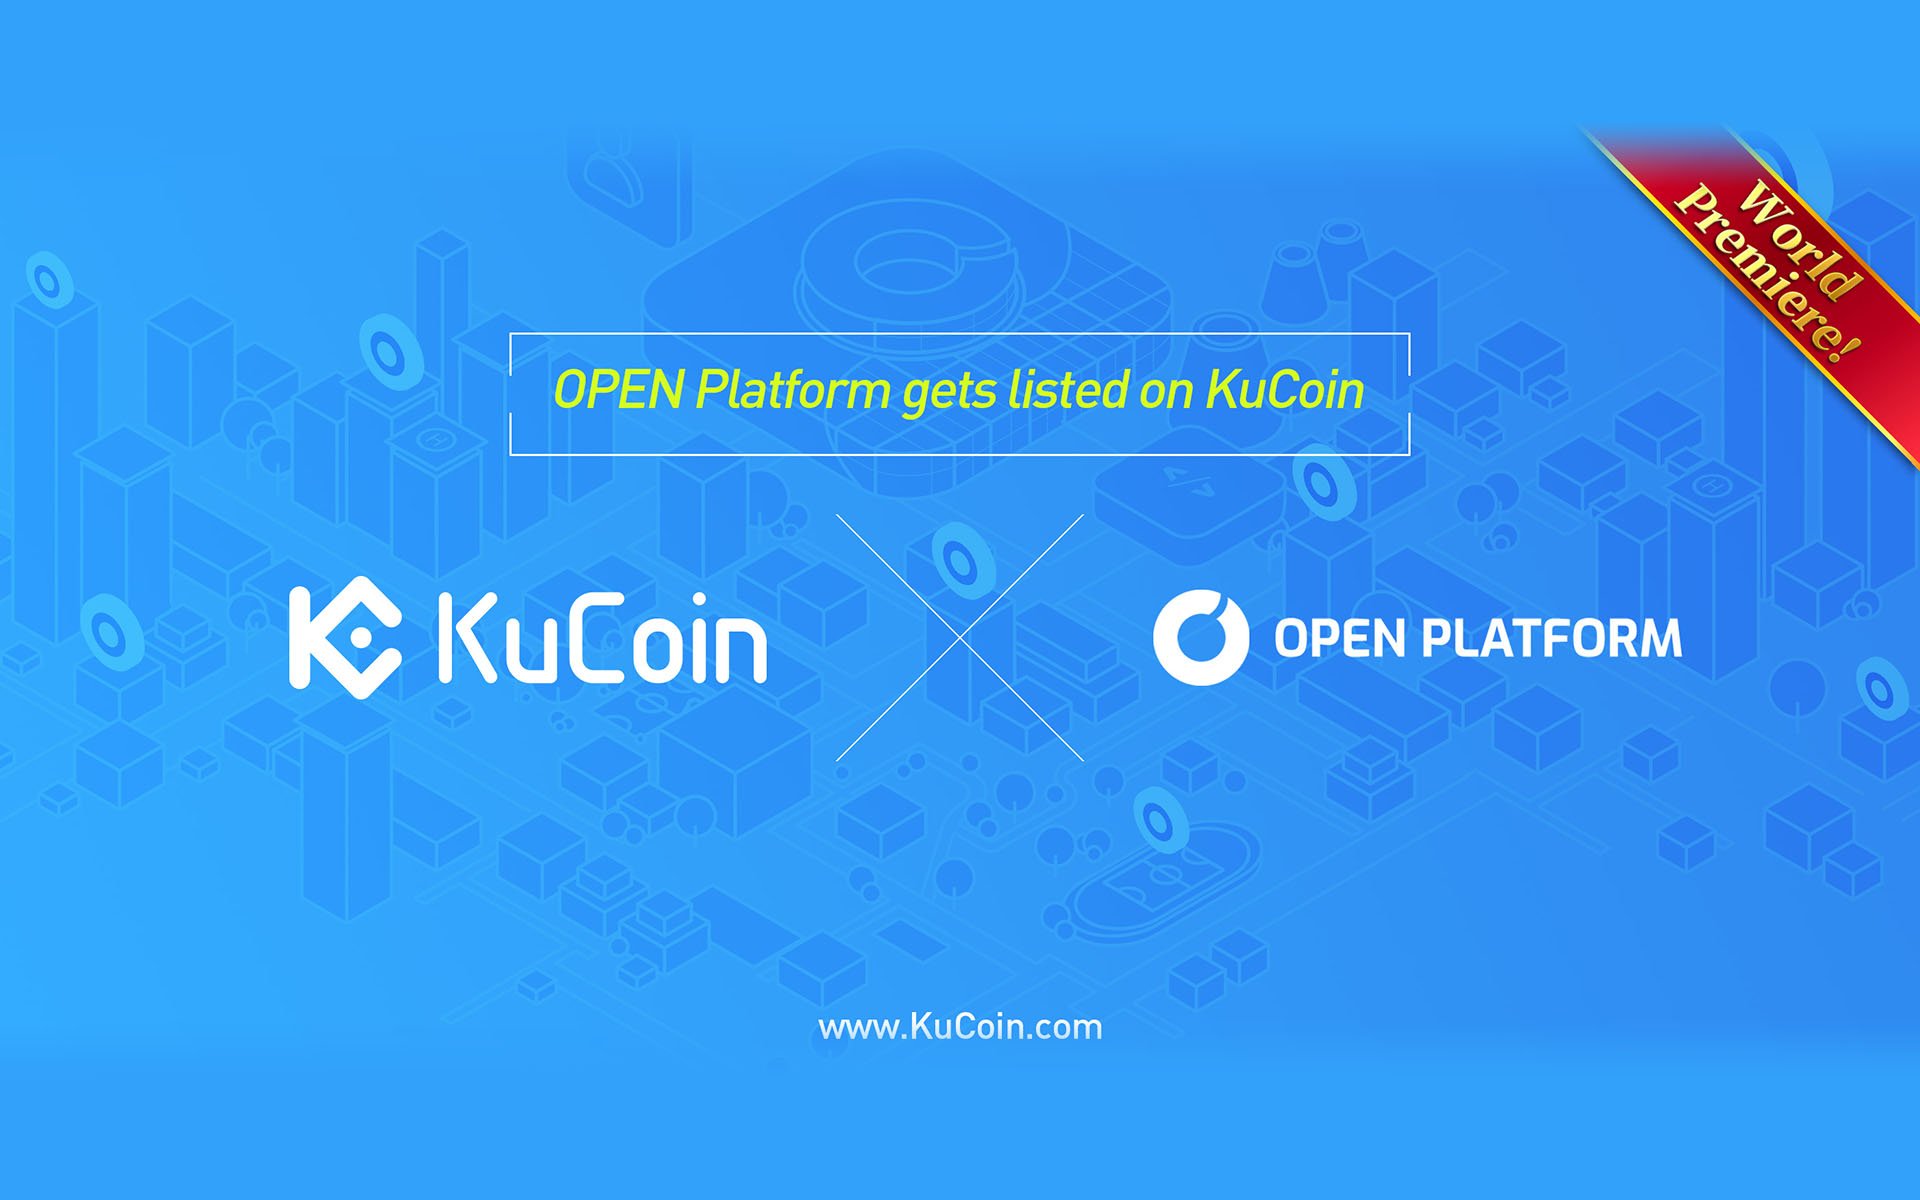 OPEN Platform (OPEN) Gets Listed On KuCoin